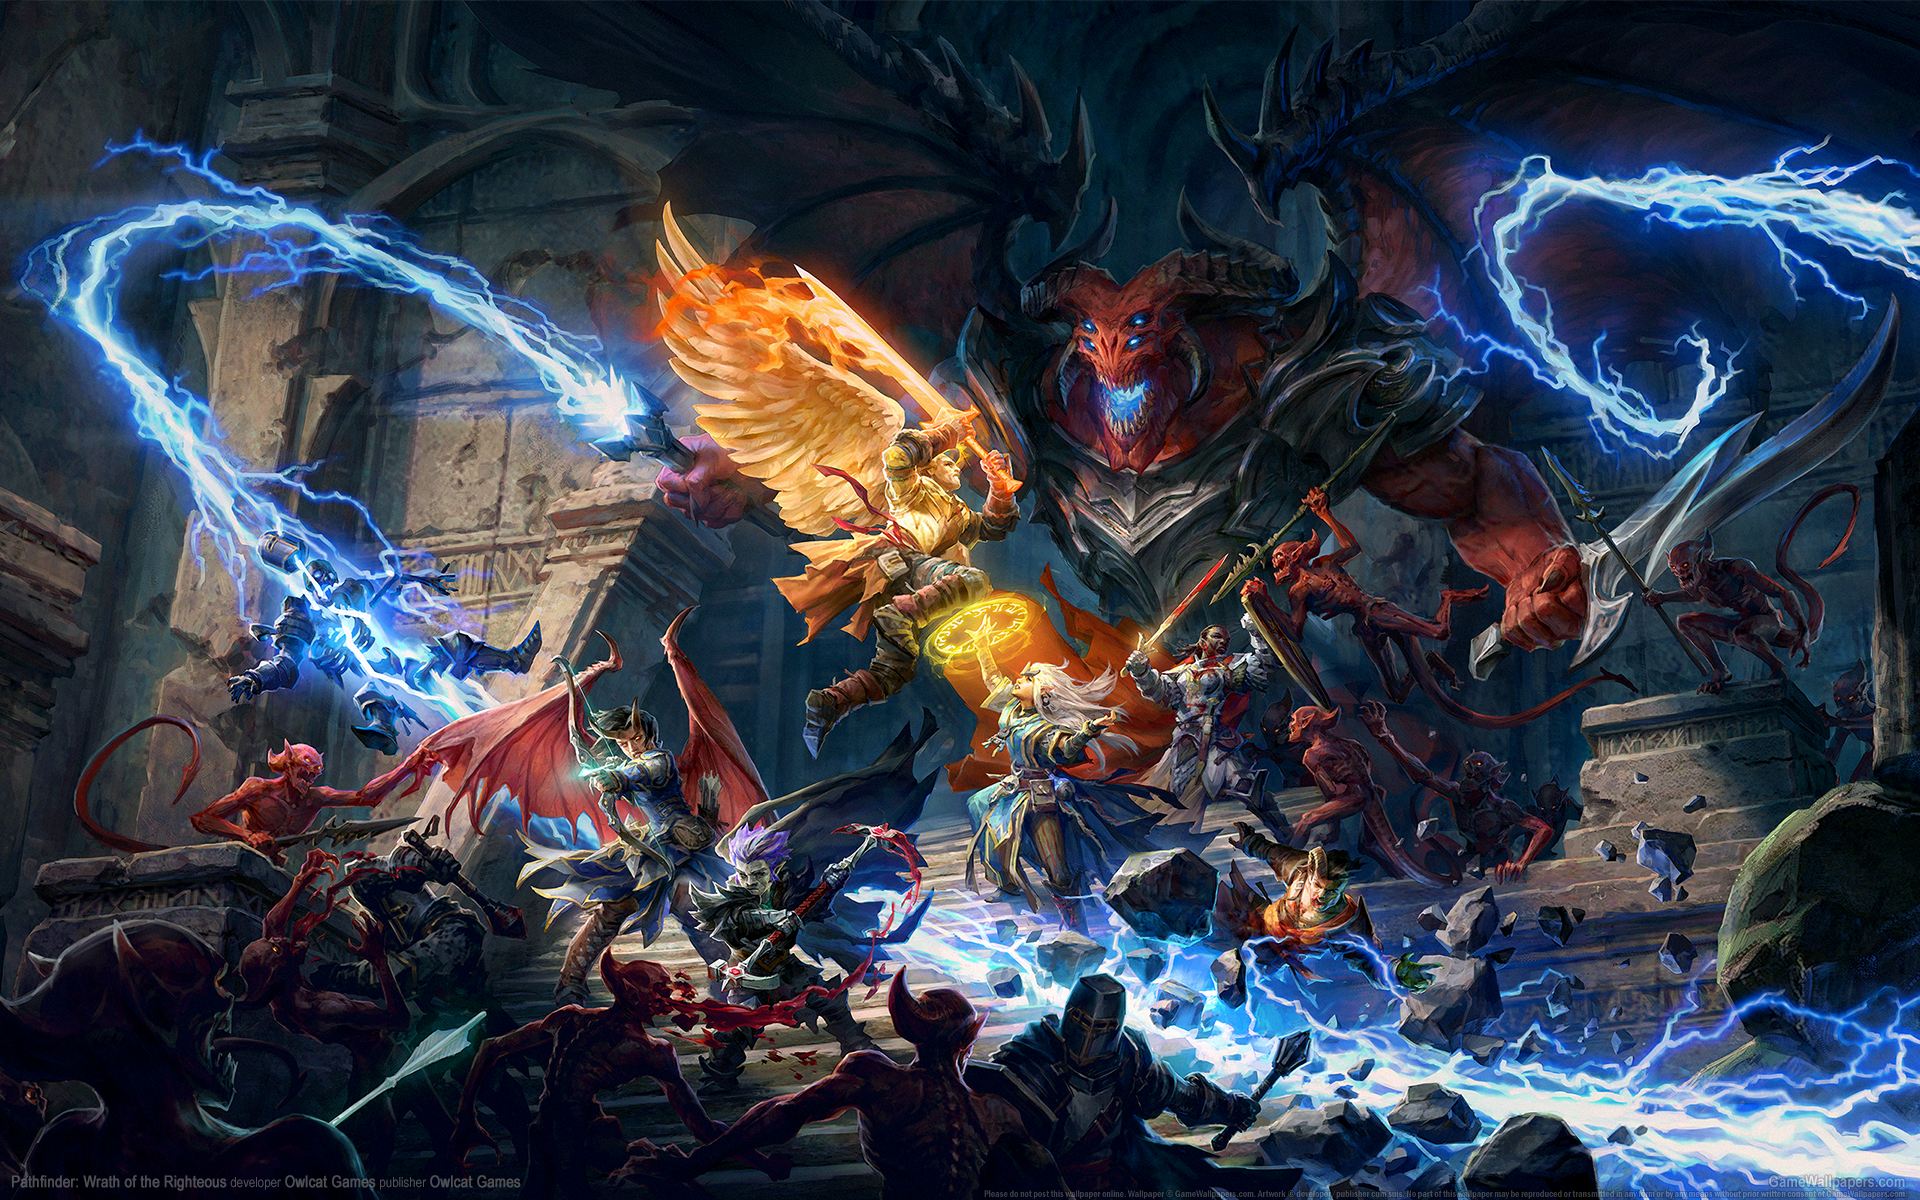 Pathfinder: Wrath of the Righteous 1920x1200 wallpaper or background 01